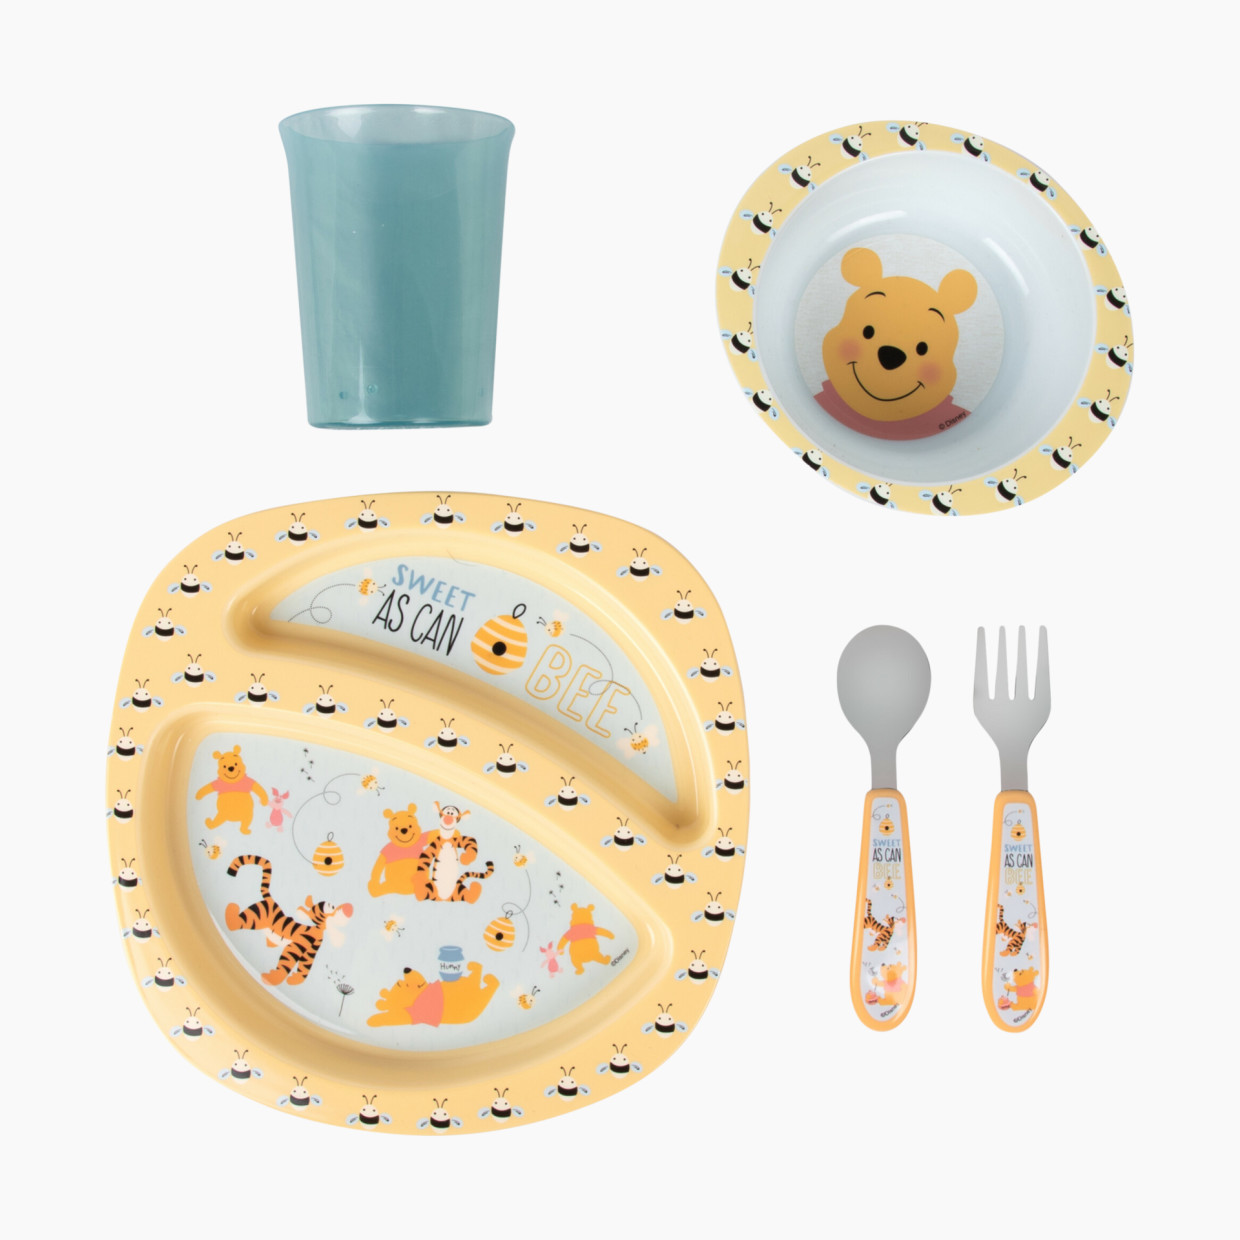 The First Years Disney 5 Piece Toddler Mealtime Set - Winnie The Pooh.